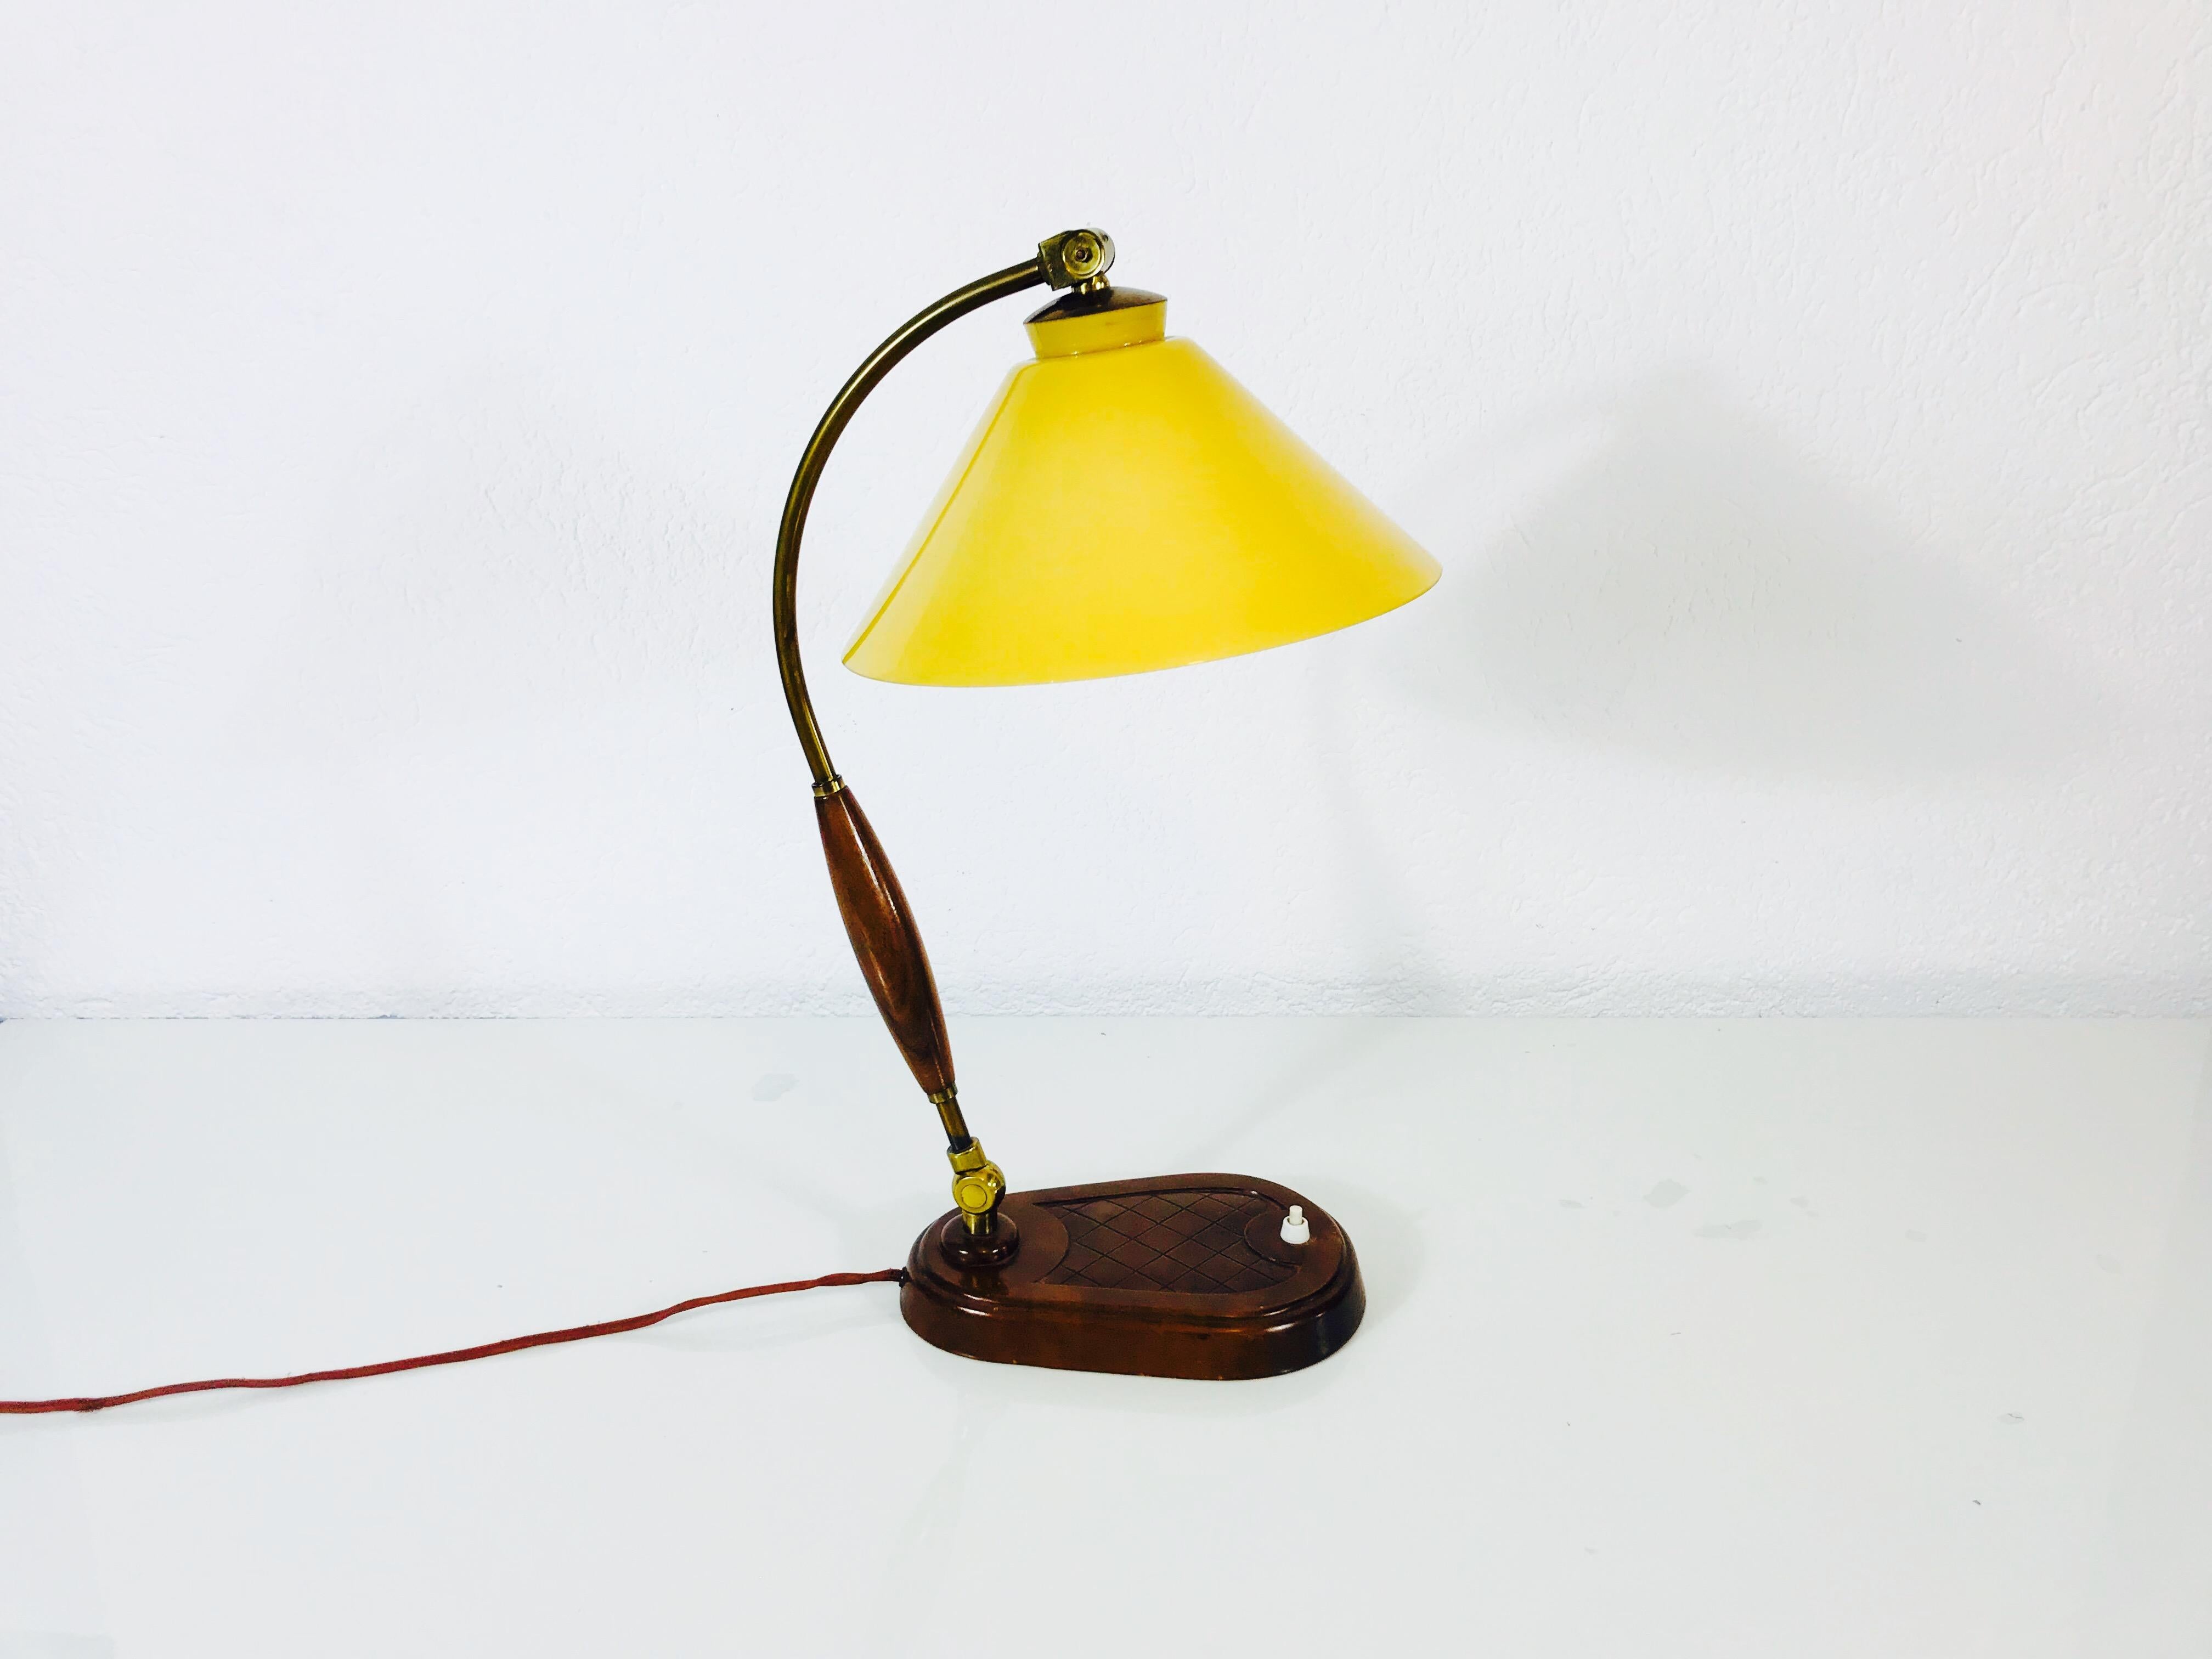 A beautiful large table lamp made in the 1940s. It has a beautiful wooden body with brass ornaments. The glass lamp shade has a yellow color. The table lamp has a beautiful Italian design.

The light requires one E27 light bulb.